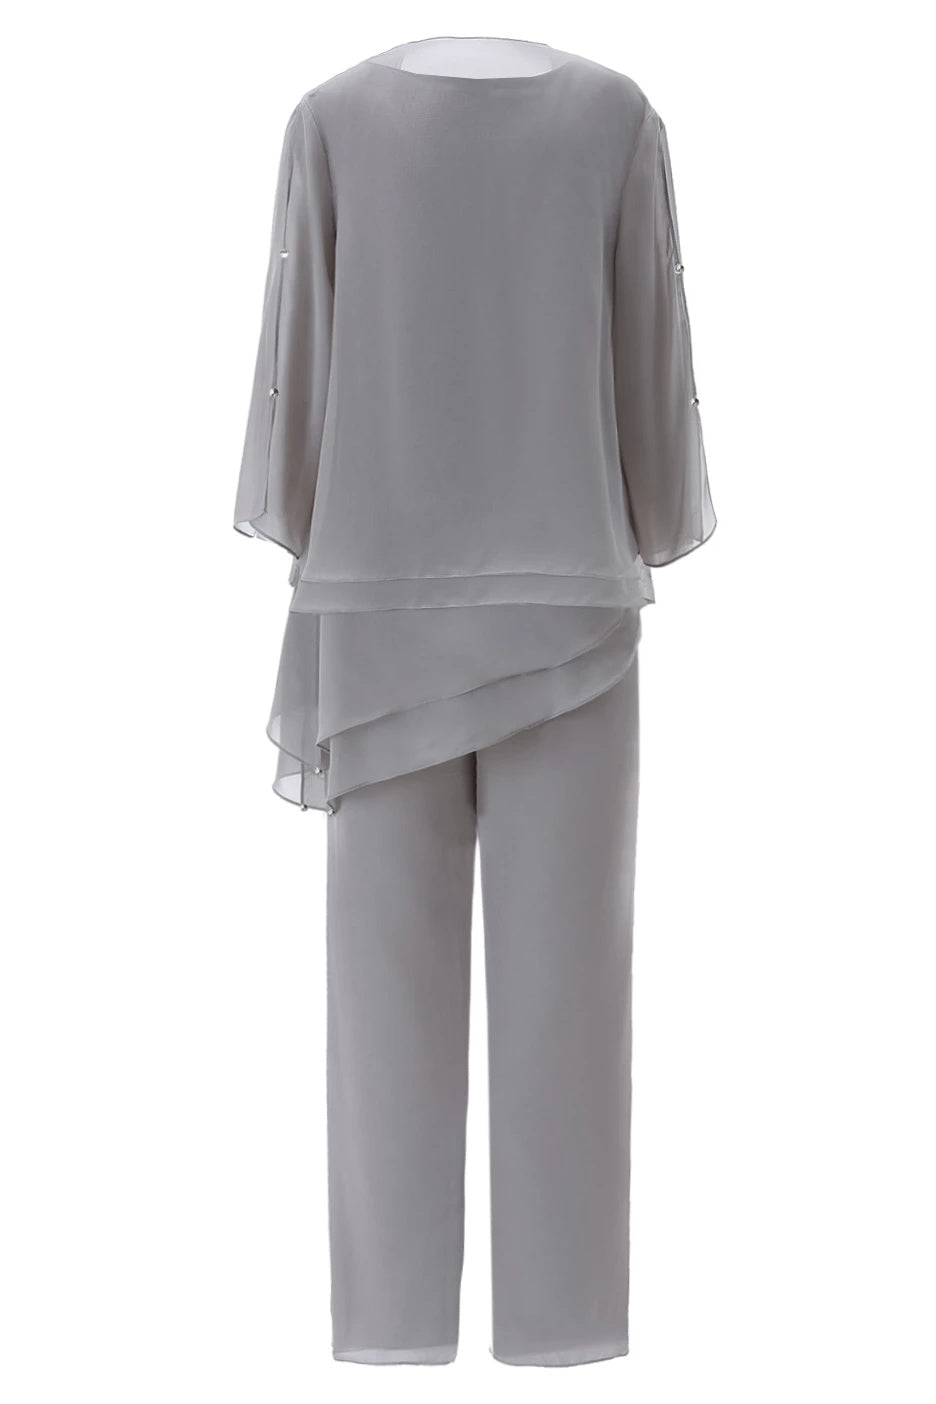 Grey Ruffles Round Neck Mother of the Bride Pant Suits